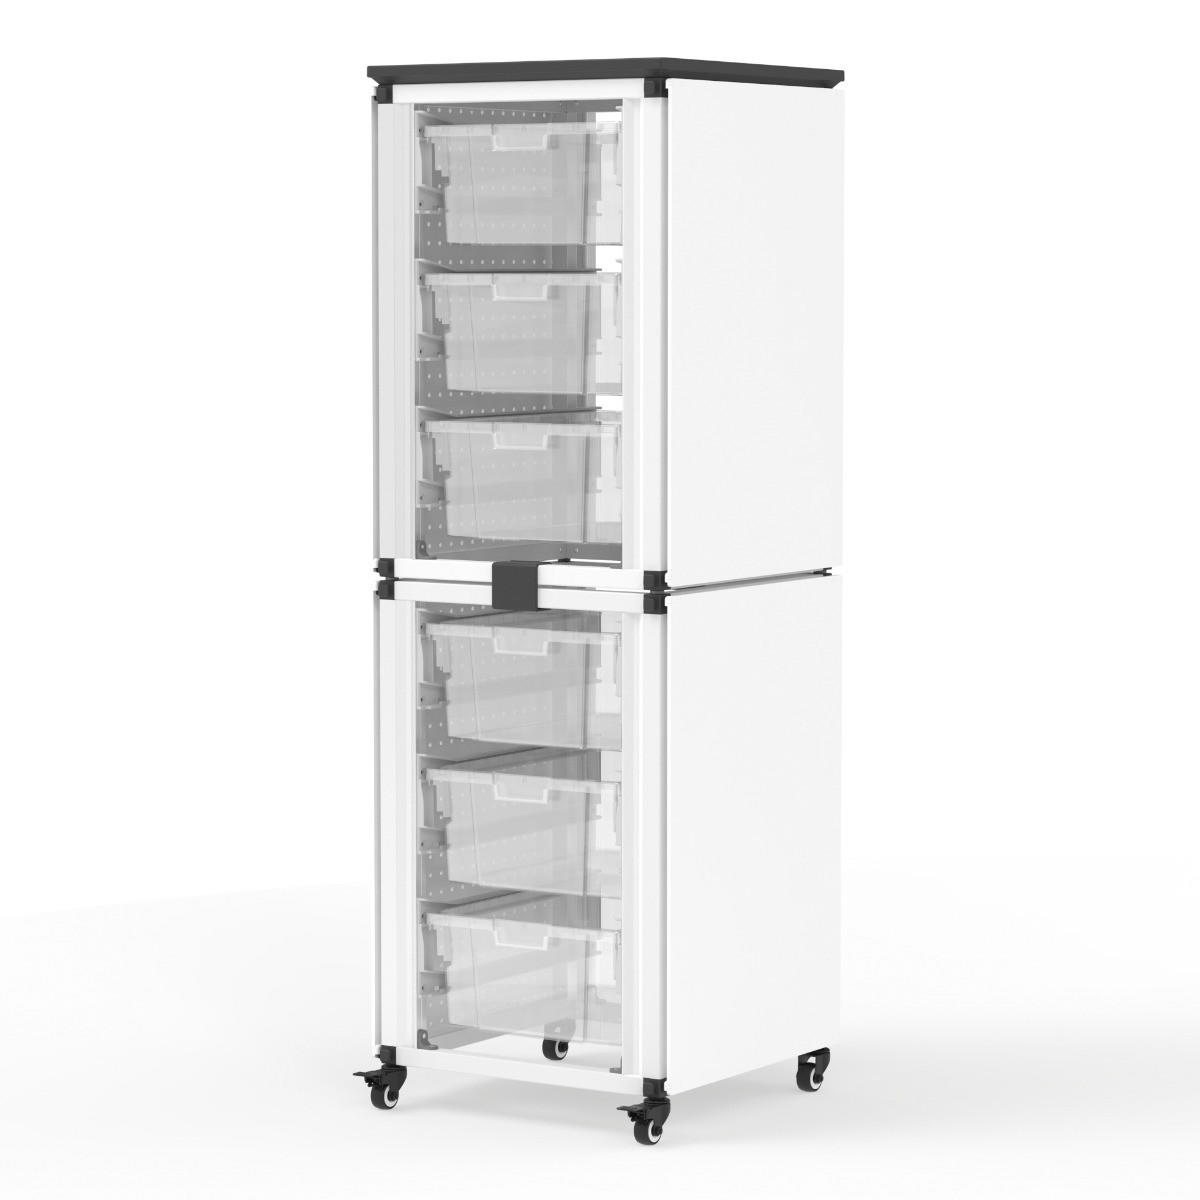 https://cdn11.bigcommerce.com/s-36yz7qwnyo/images/stencil/original/products/26702/48475/luxor-modular-classroom-storage-cabinet-2-stacked-modules-with-6-large-bins__06895.1683134122.jpg?c=1